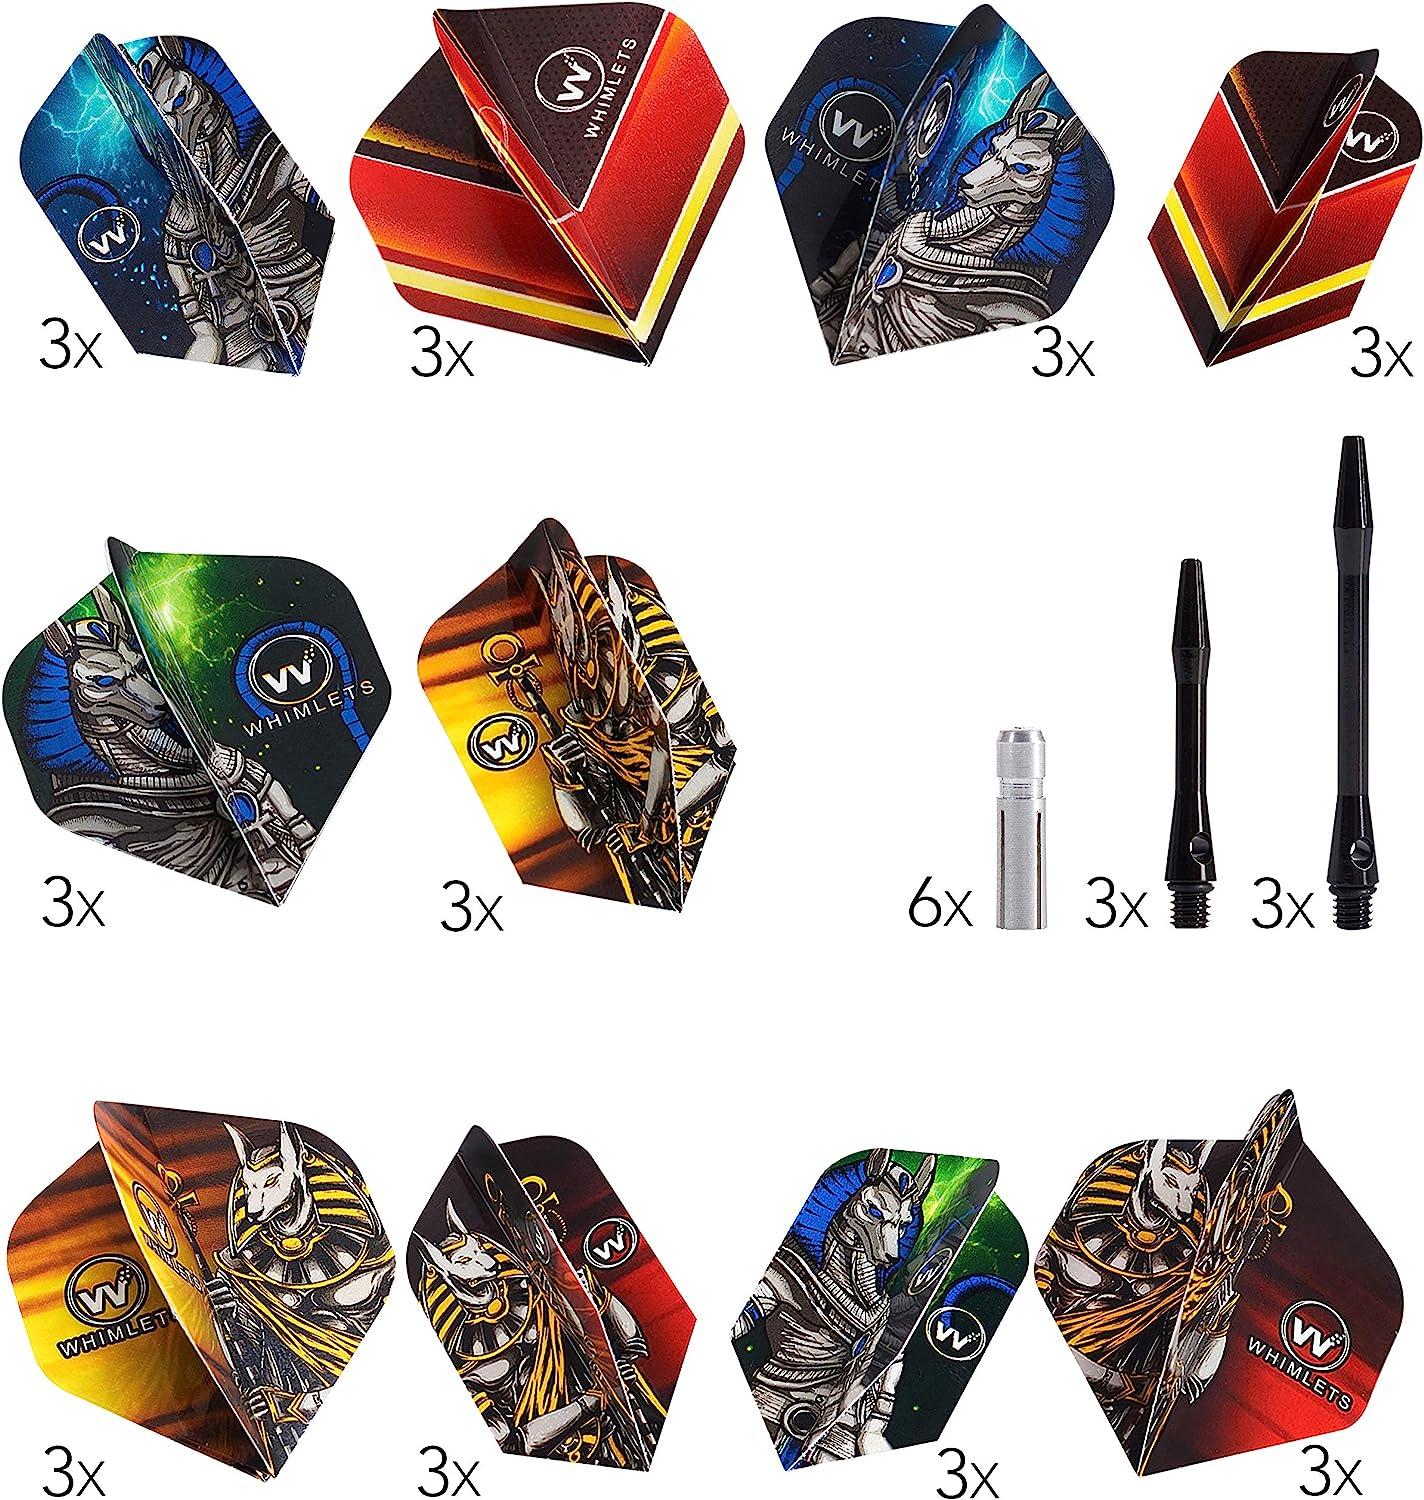 Whimlets Flights and Accessories Kit - 30-Piece Professional Flight Set with Standard/Slim Shape Darts Flights and Flights Protectors - Customizable Dart Accessories in 10 Unique Designs Slim/Standard Flights